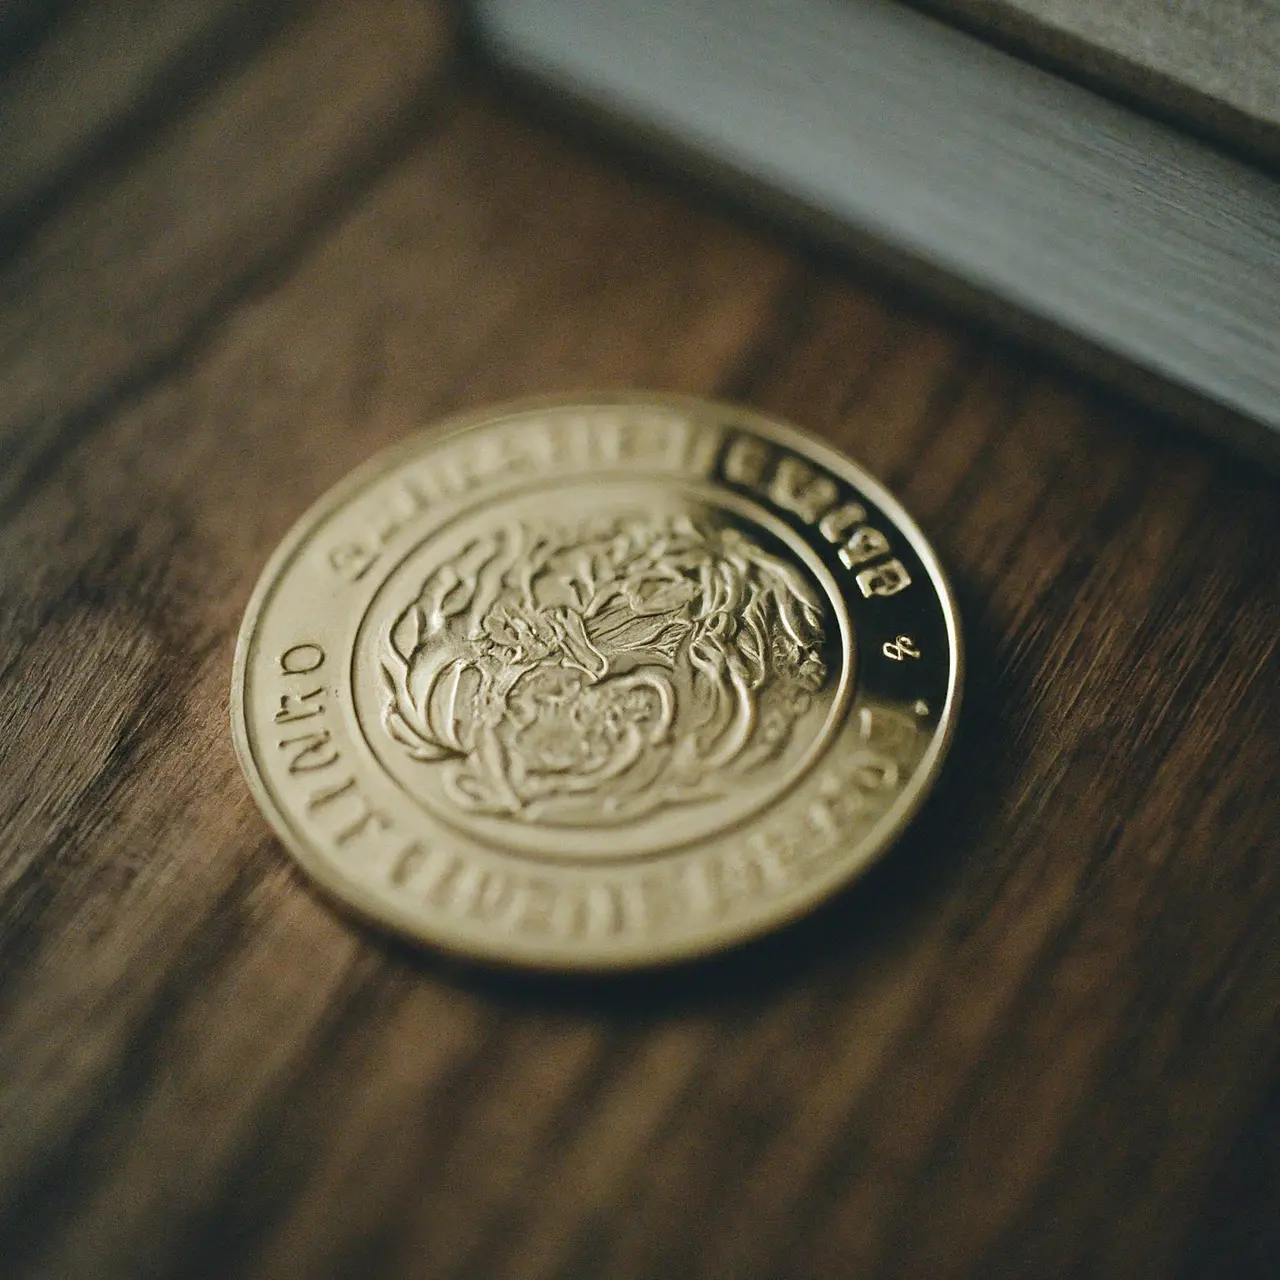 Close-up of a custom coin with company logo. 35mm stock photo